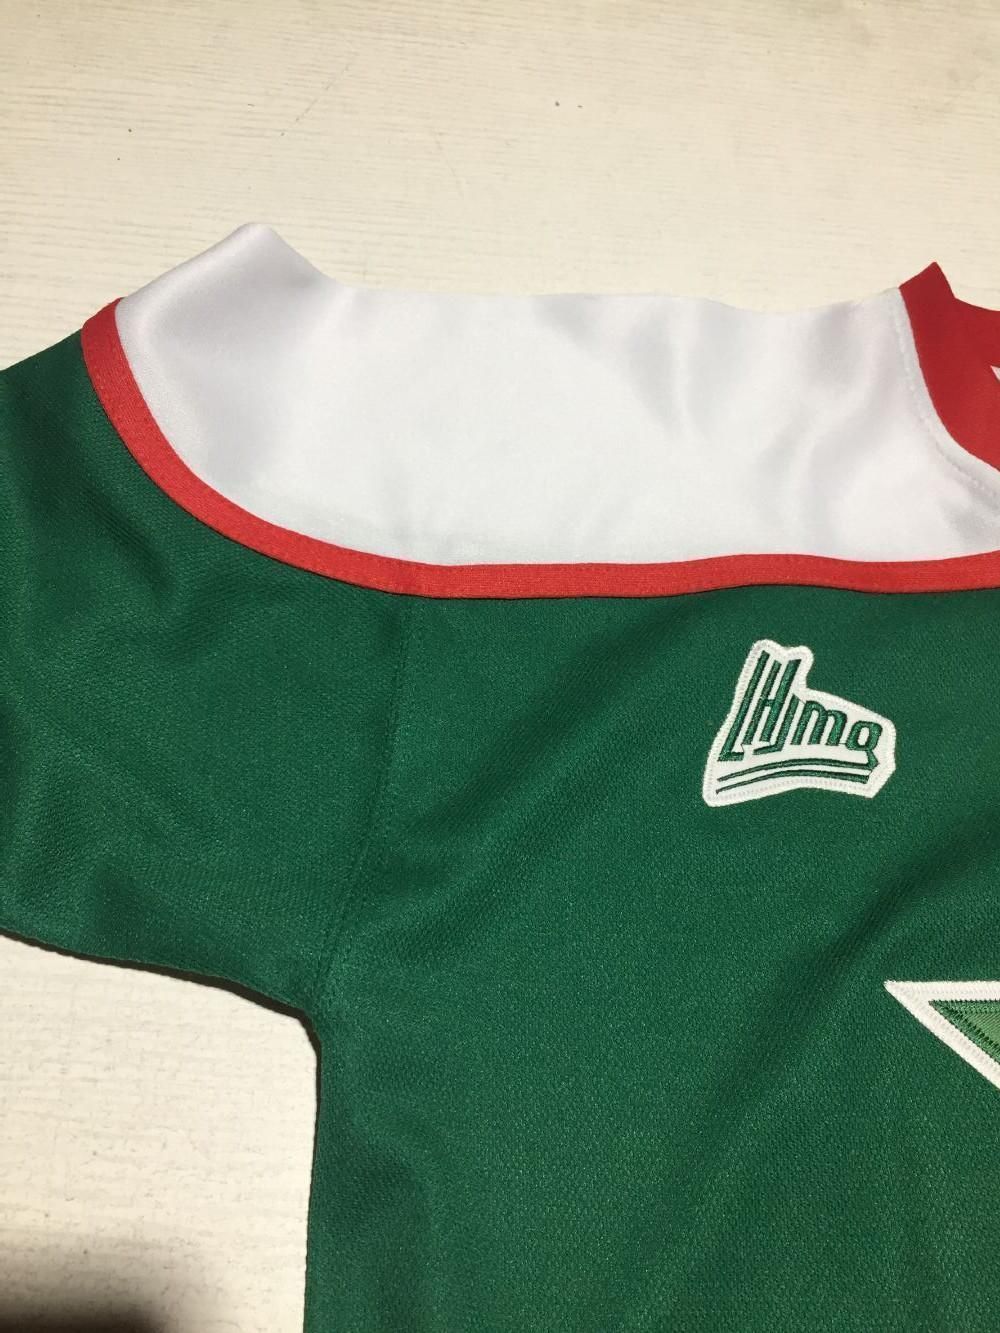 CUSTOM Customize Mens CHL NICO HISCHIER Halifax Mooseheads Jerseys Leaf  Metal Green Stitched Custom Hockey Jersey S 4XL From Super_supplier_001,  $37.11